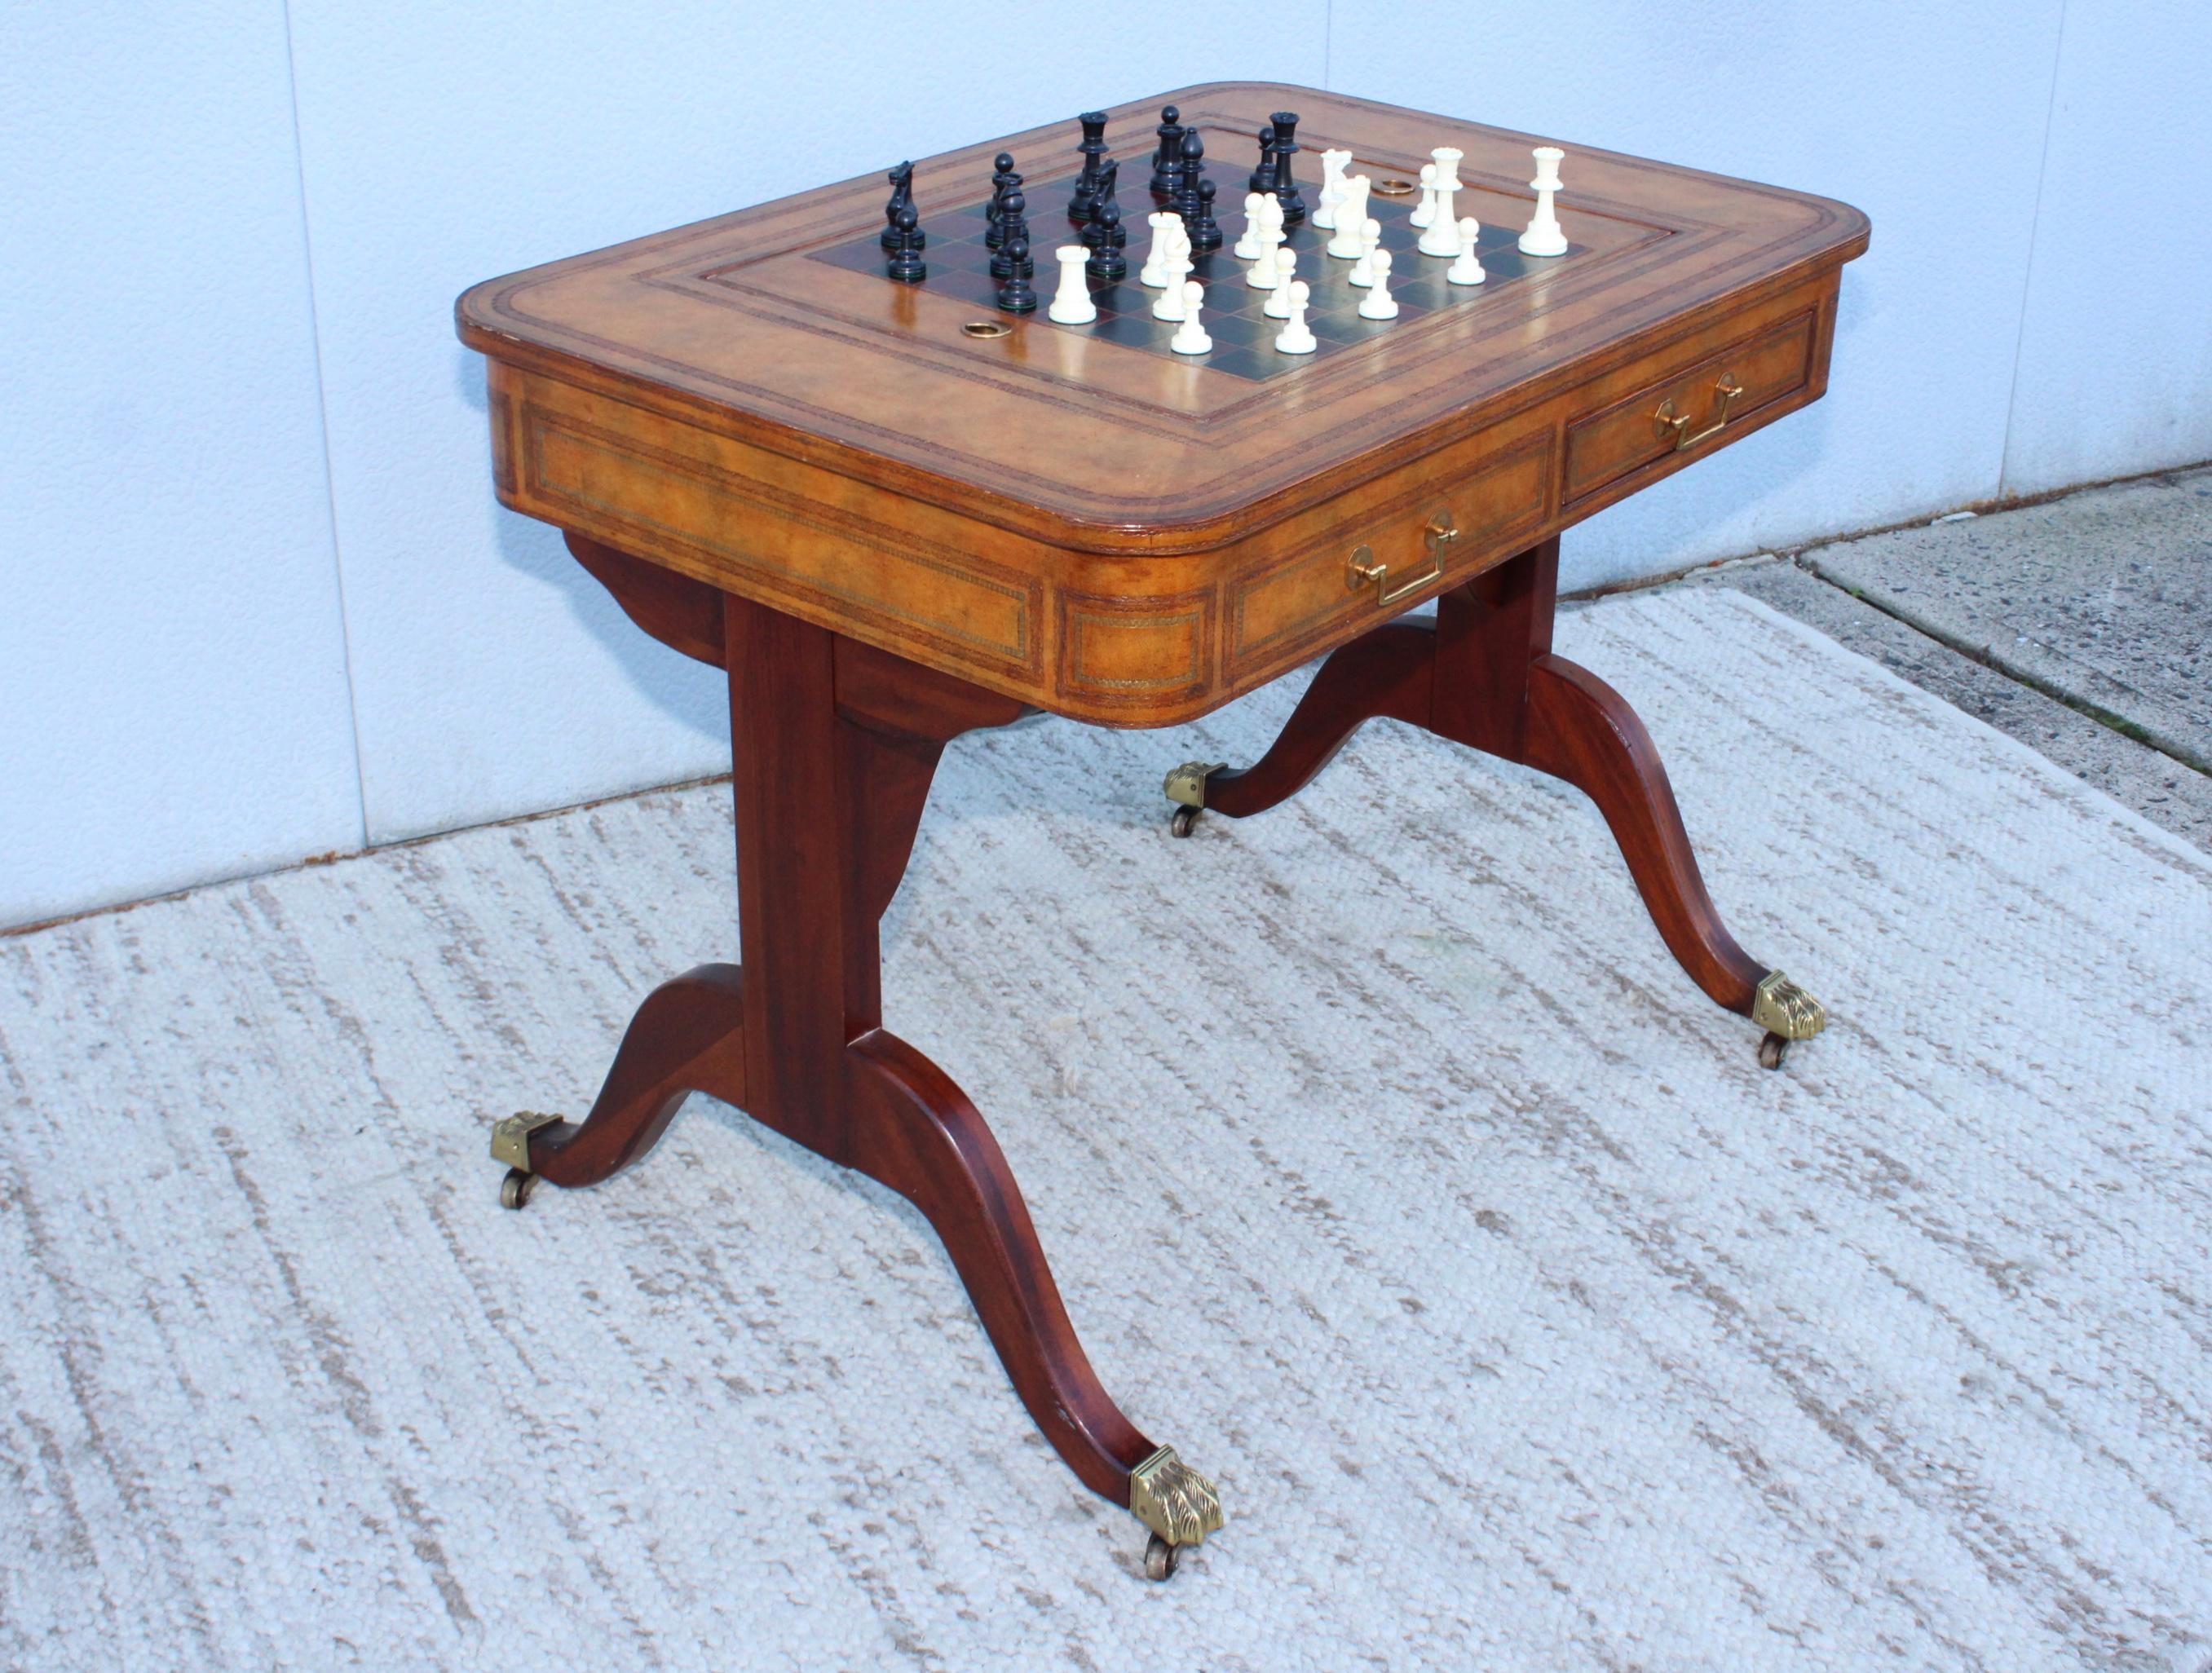 1970s leather game table by Maitland Smith, in vintage original condition with minor wear and patina.